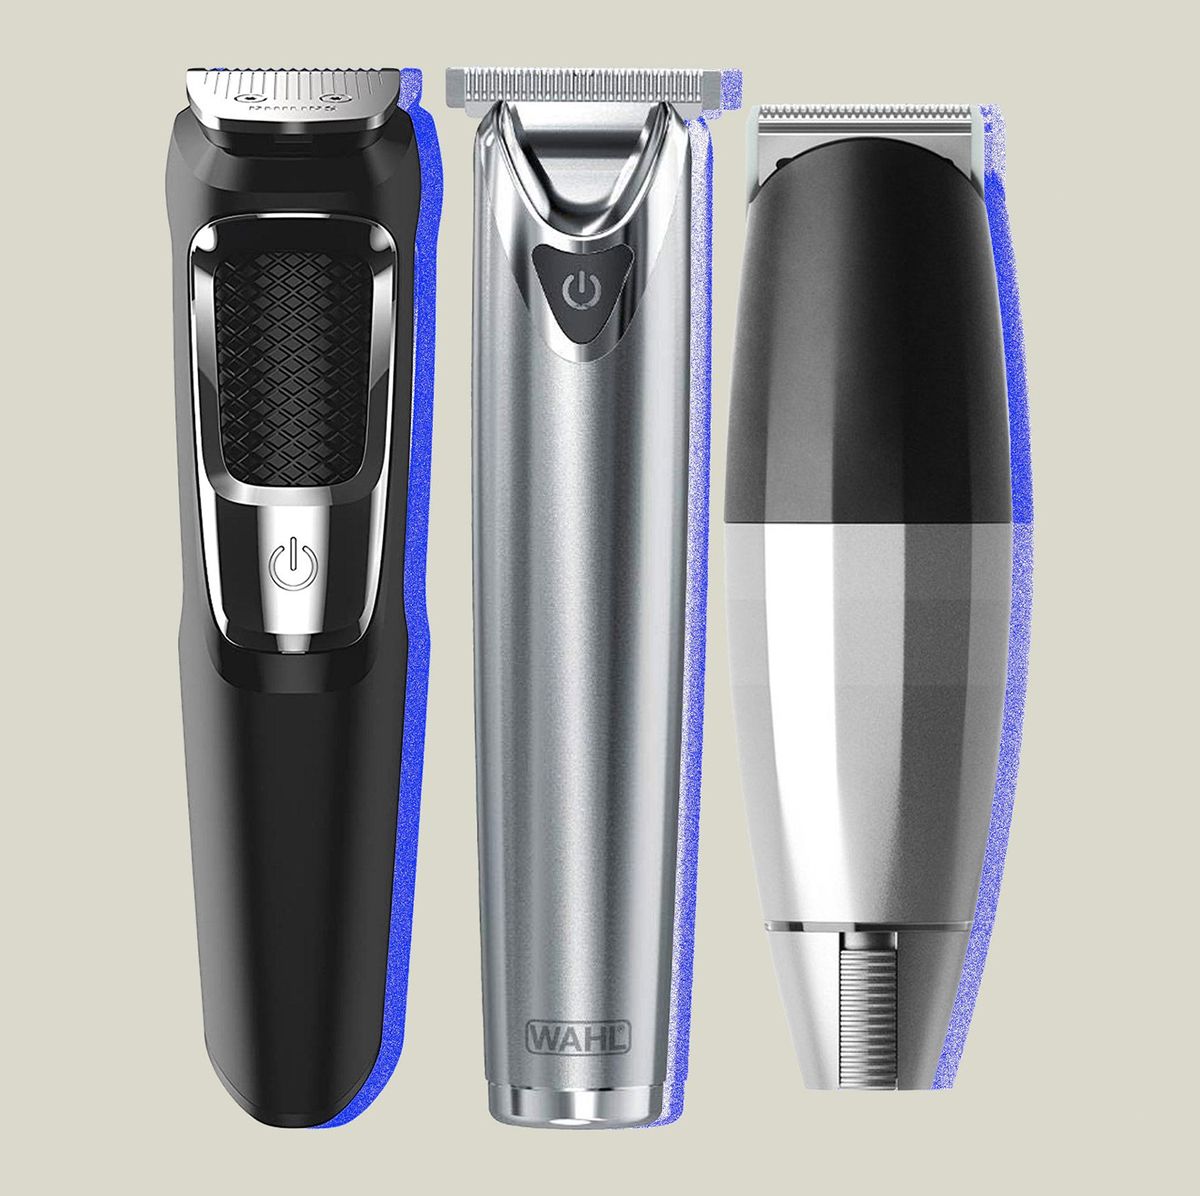 Best Barber Tools: 5 Most Powerful Detachable Blade Clippers